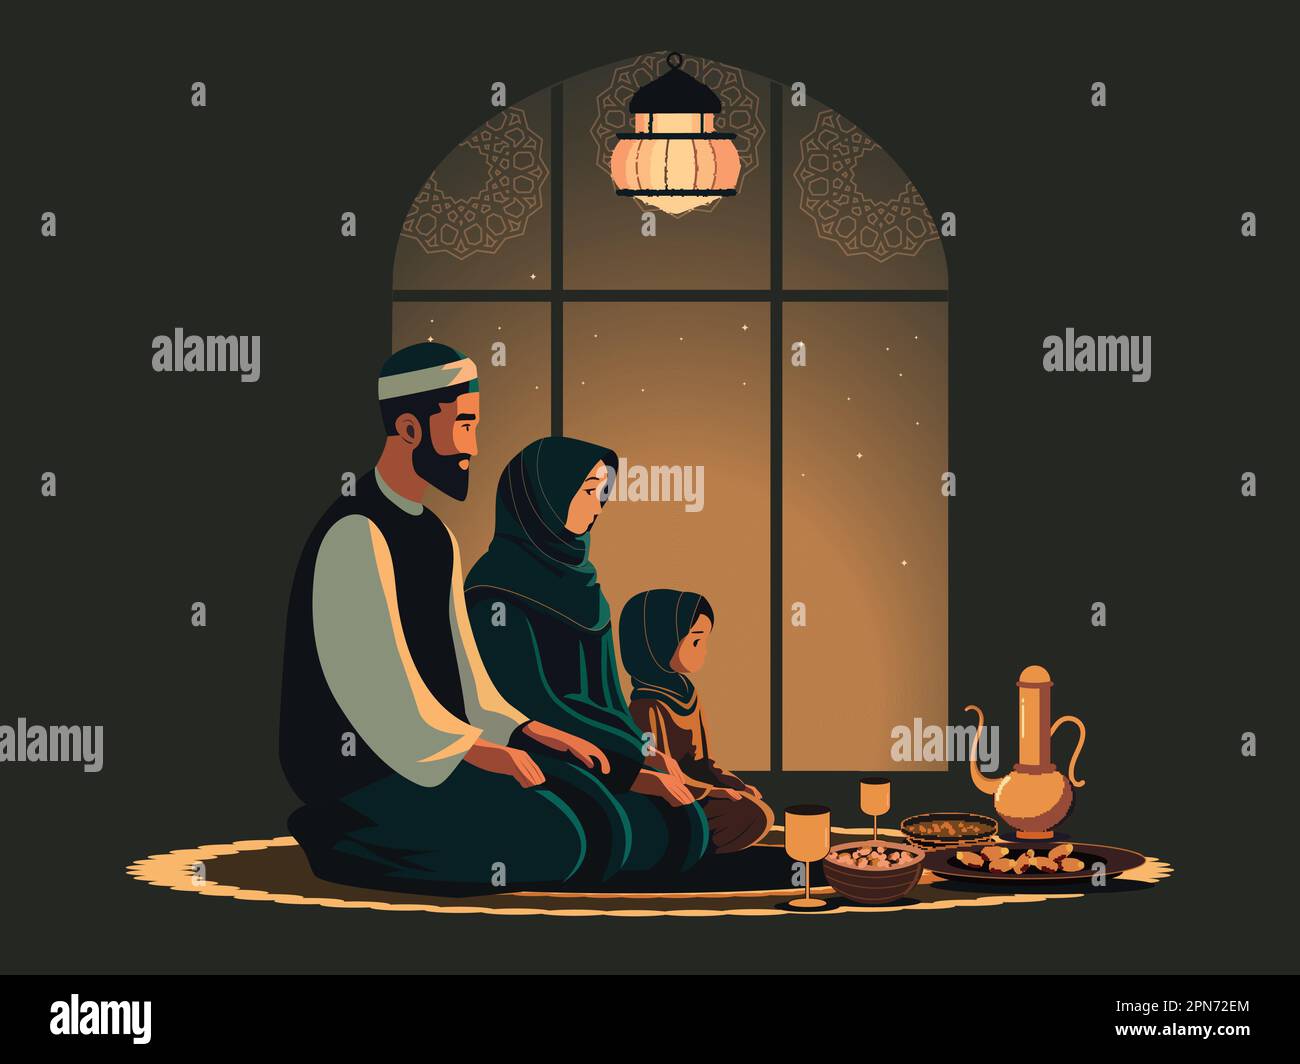 Illustration Of Muslim Family Praying Before Meal On Mat In Front of Mandala Islamic Window At Night. Stock Vector